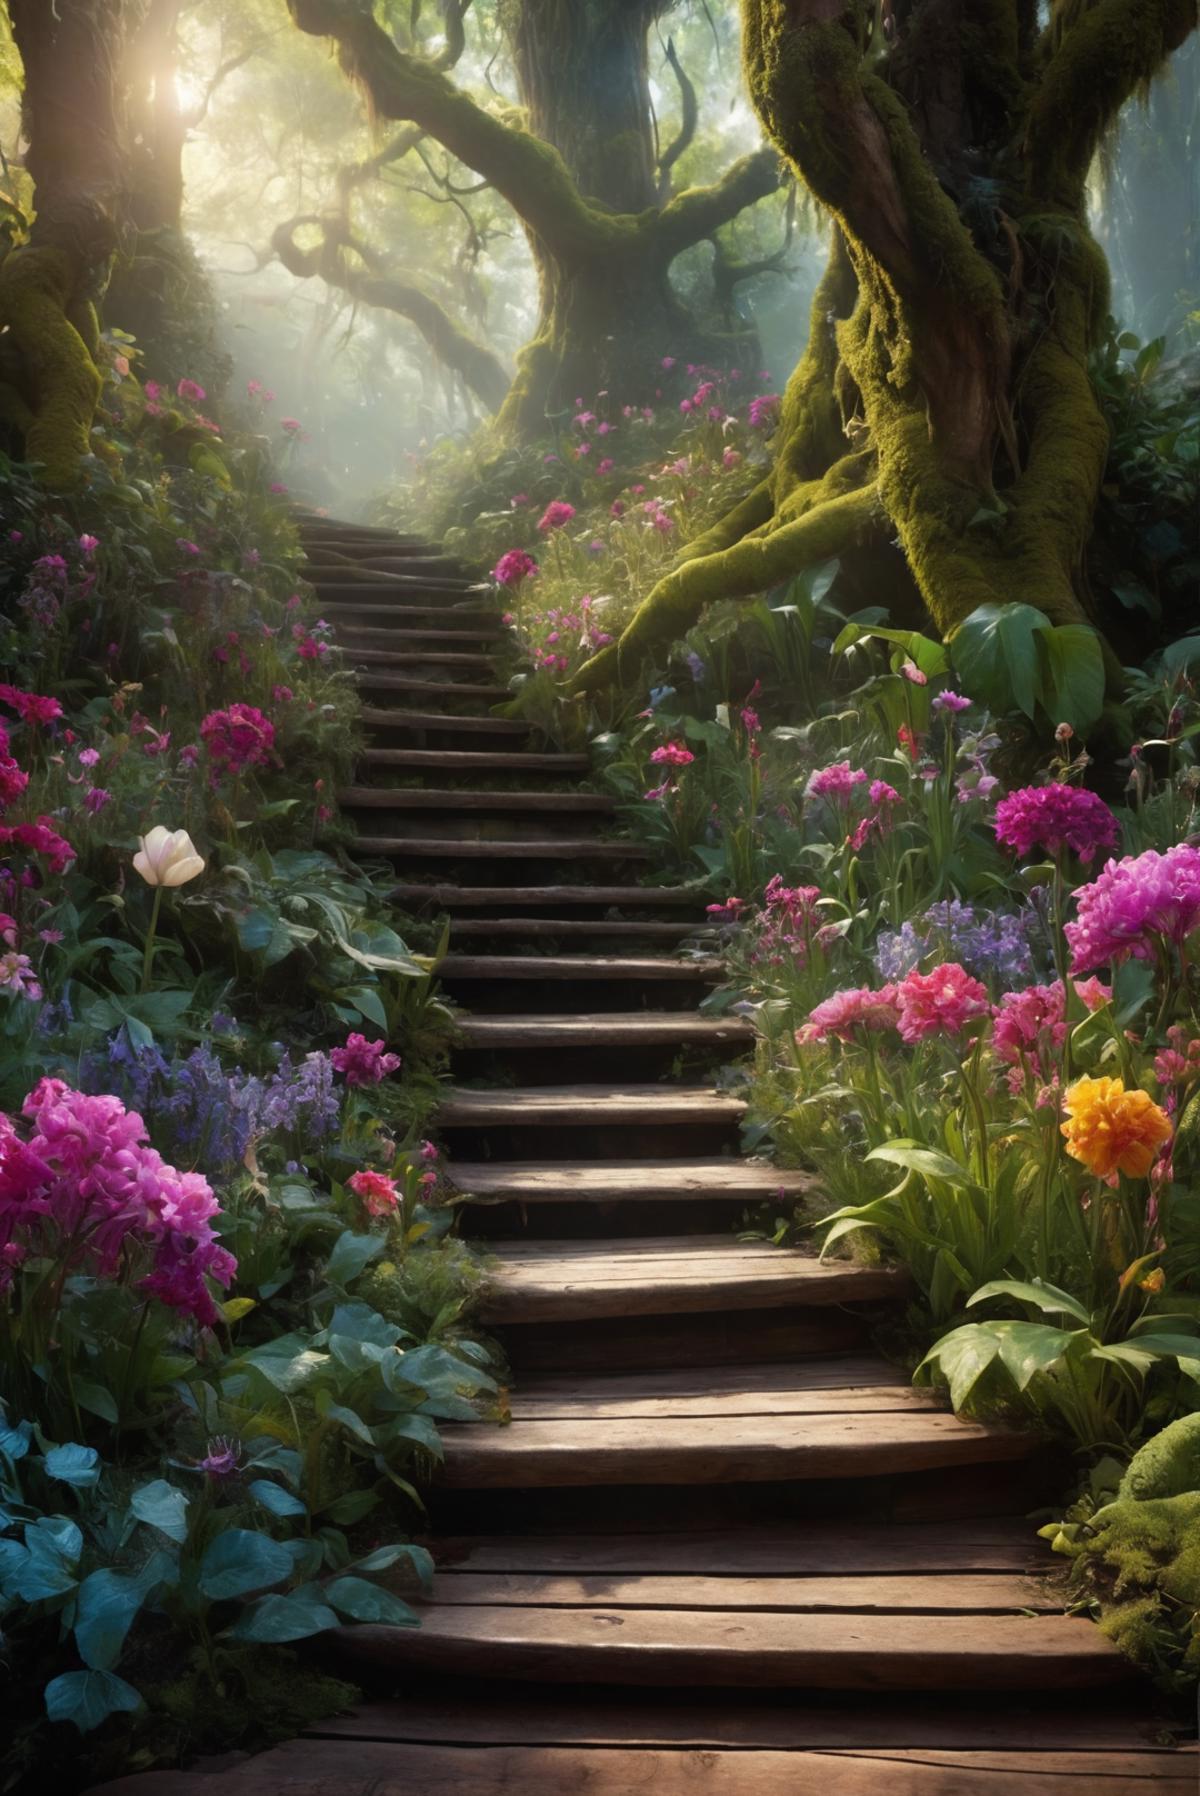 Flower-covered staircase leading to a lush green forest in a garden